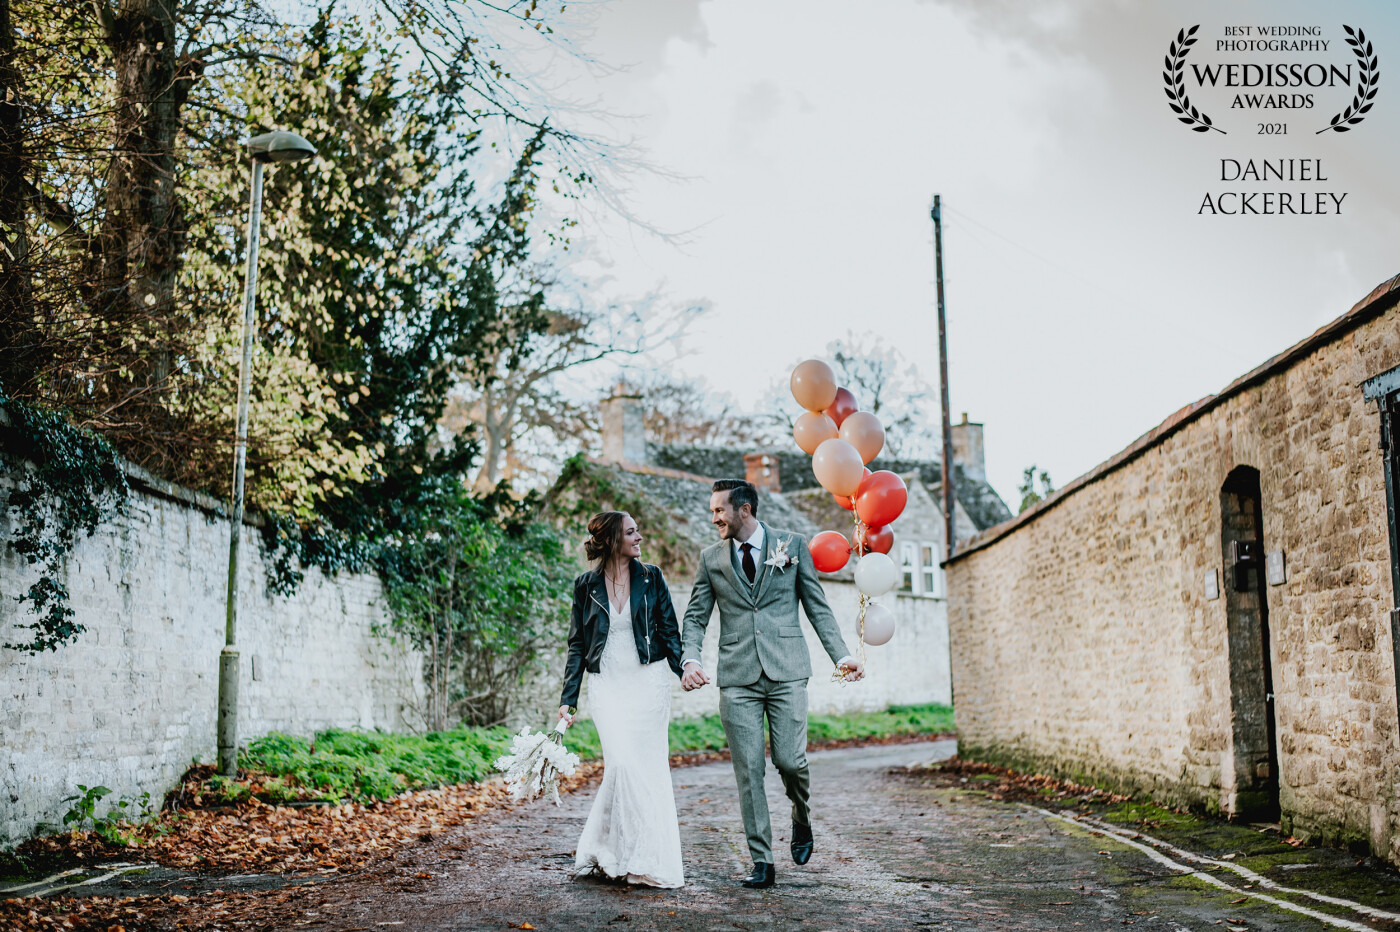 Laura & Kieron had a wonderful micro wedding here in the UK, and when we decided to go for a walk, they brought some balloons with them and they added that magical element to the photograph.